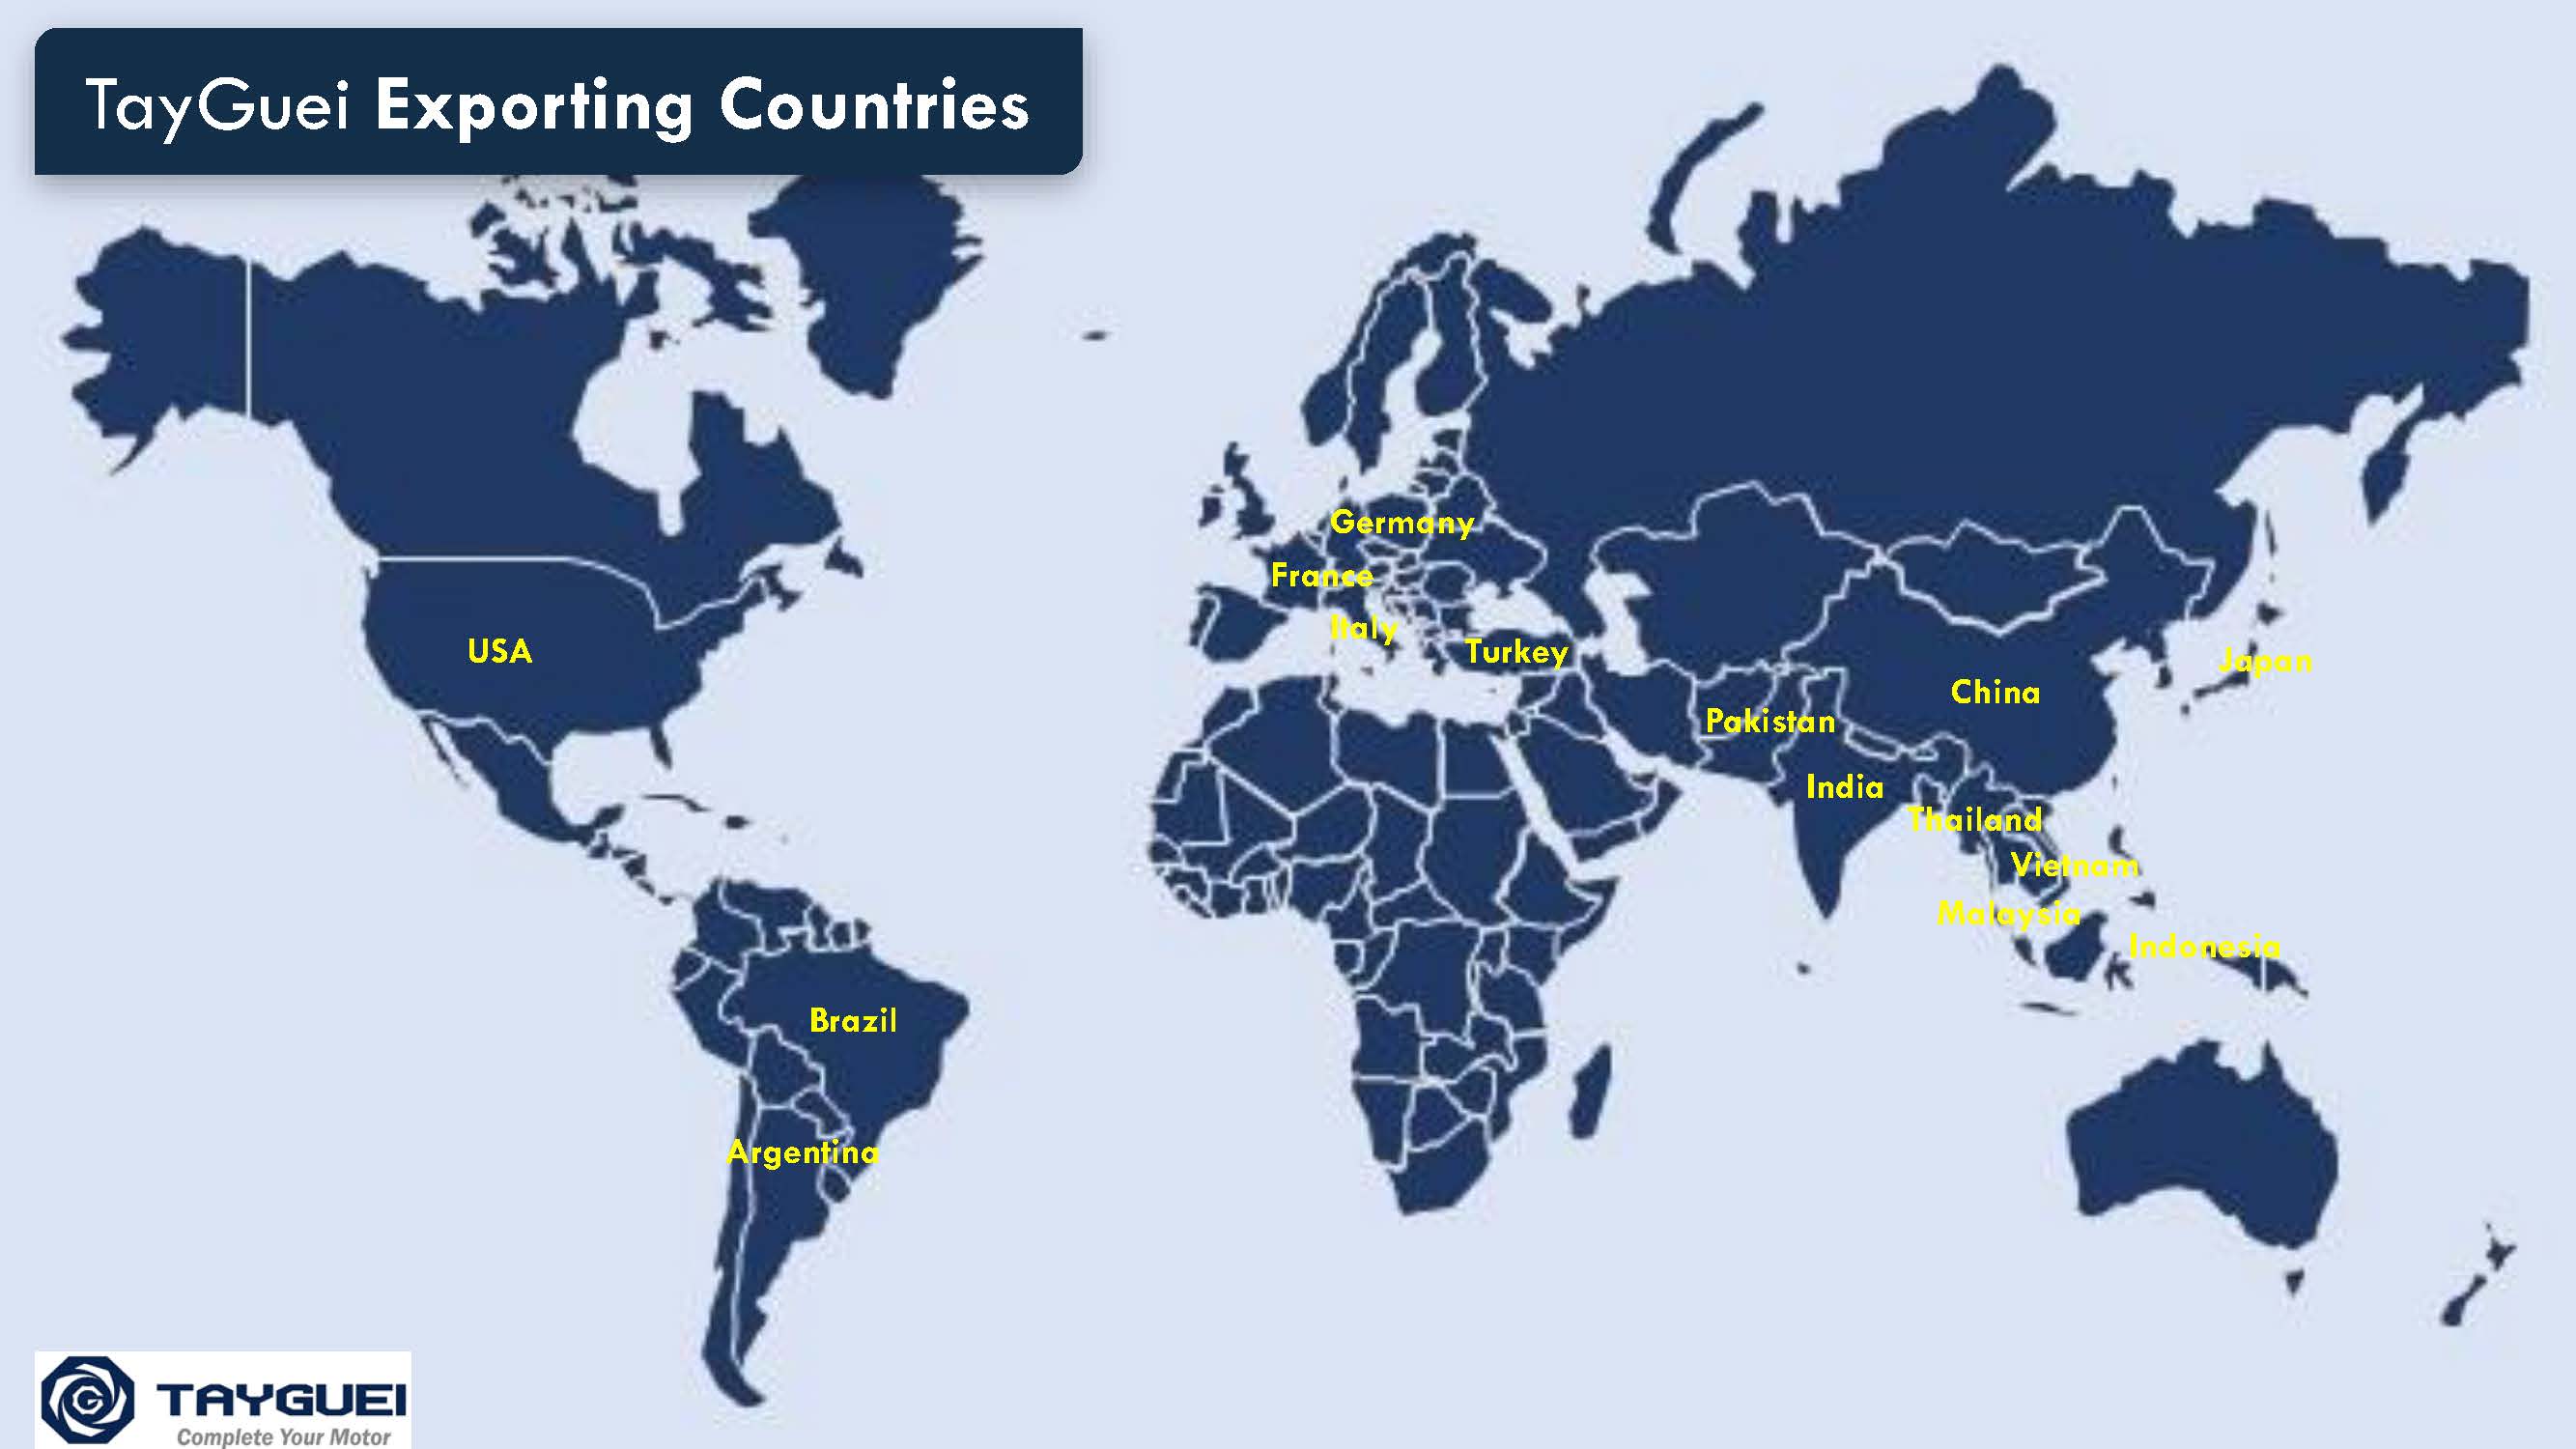 There are 15 countries to be exported.